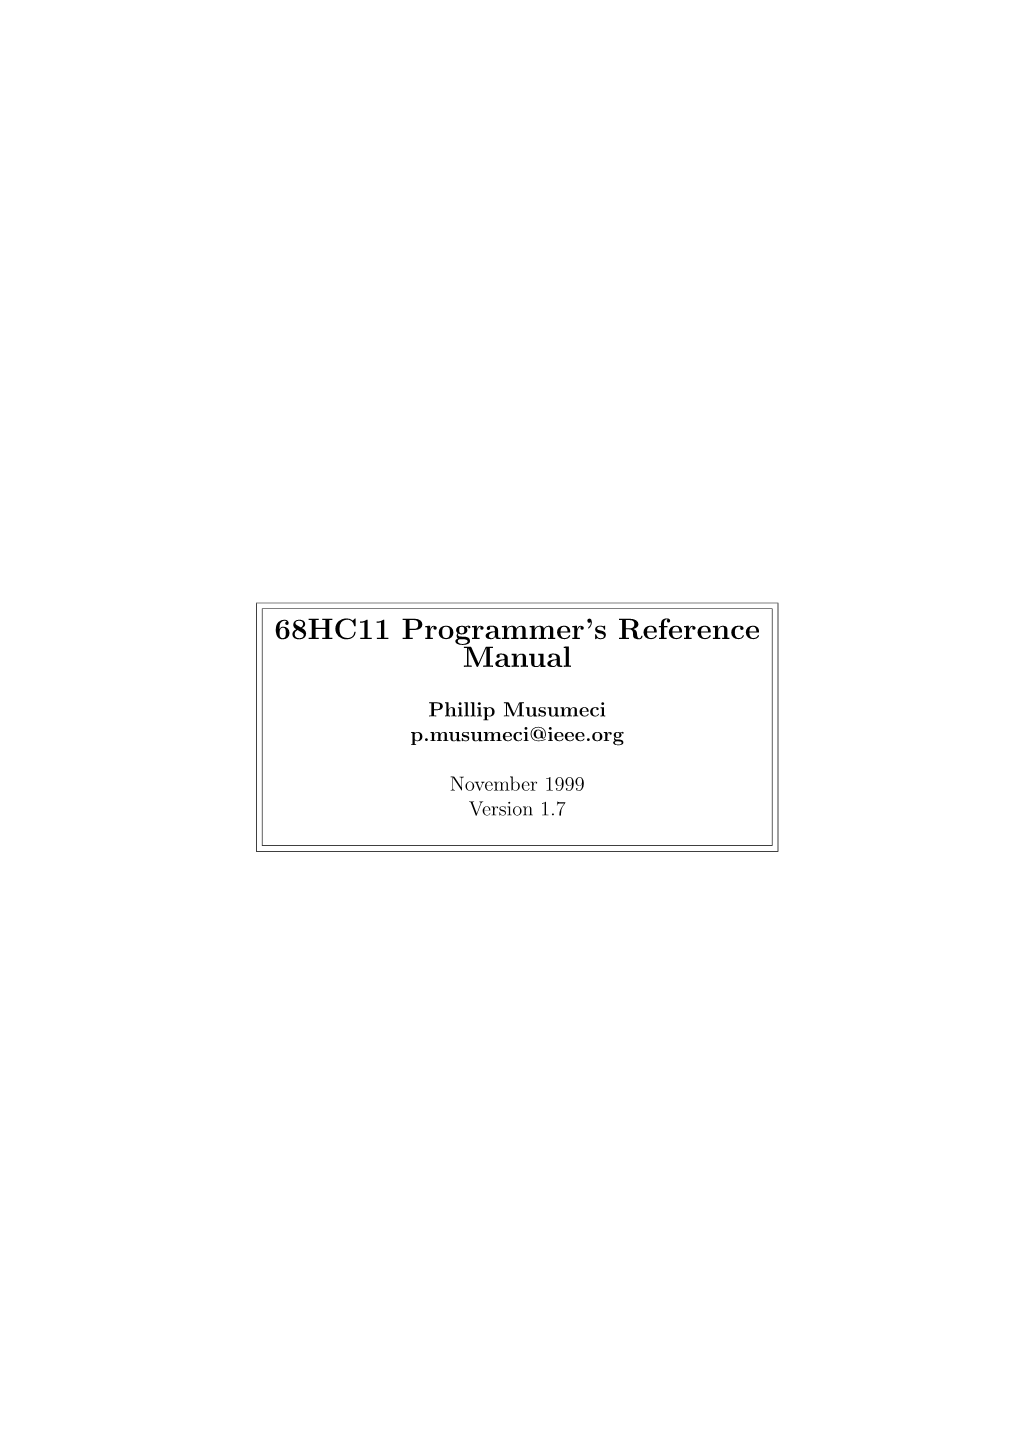 68HC11 Programmer's Reference Manual